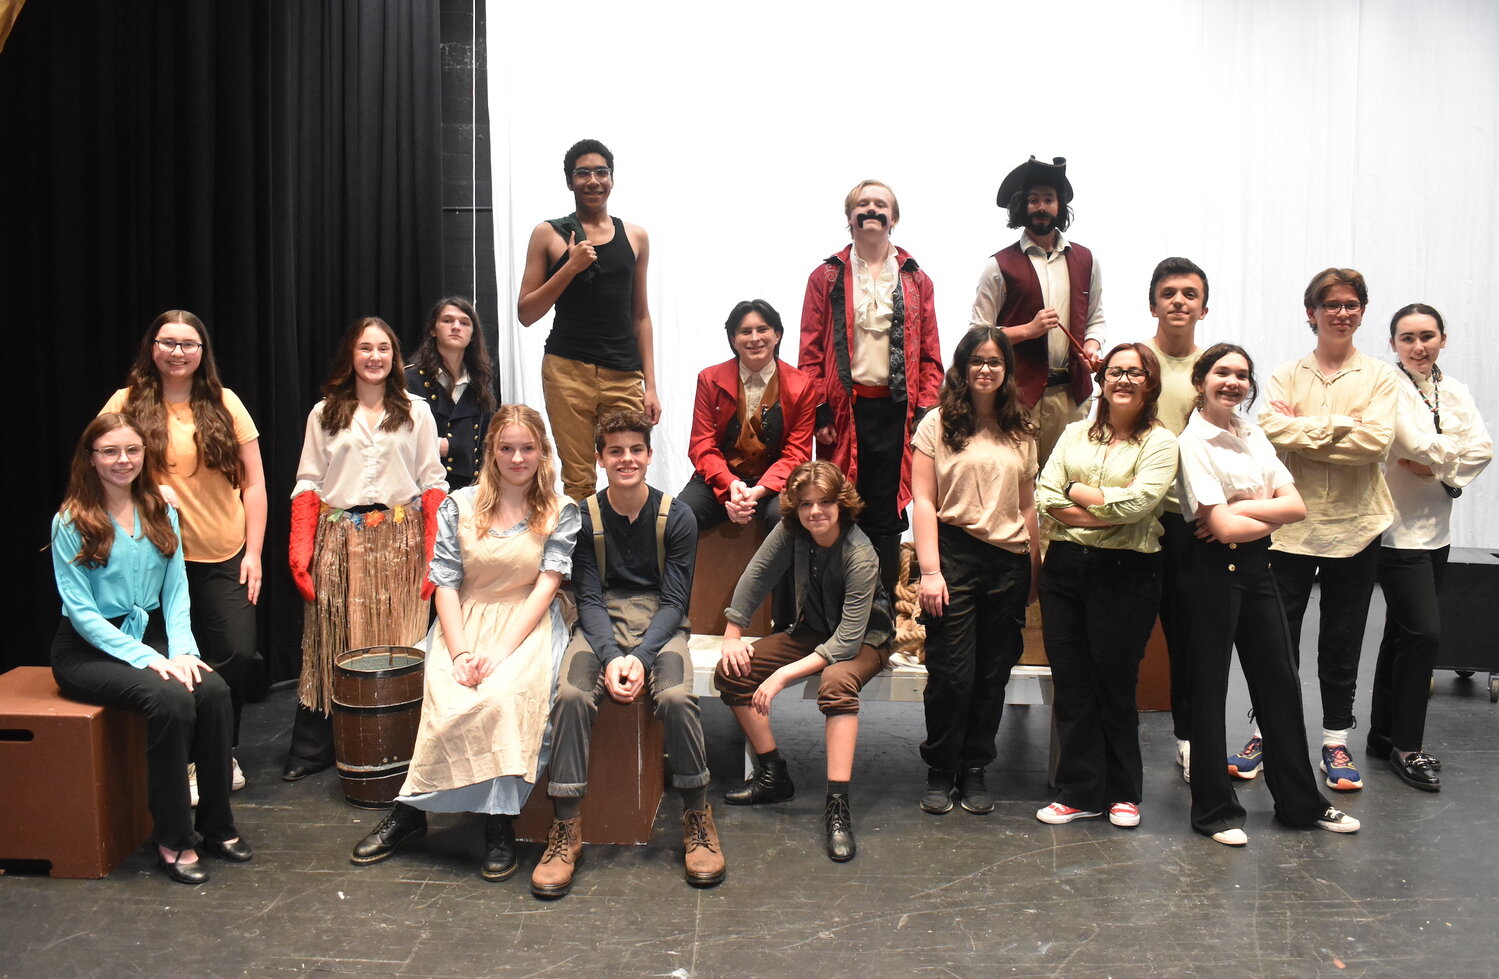 The cast of ‘Peter and the Starcatcher’ is preparing for four performances of the show from Nov. 17-19.